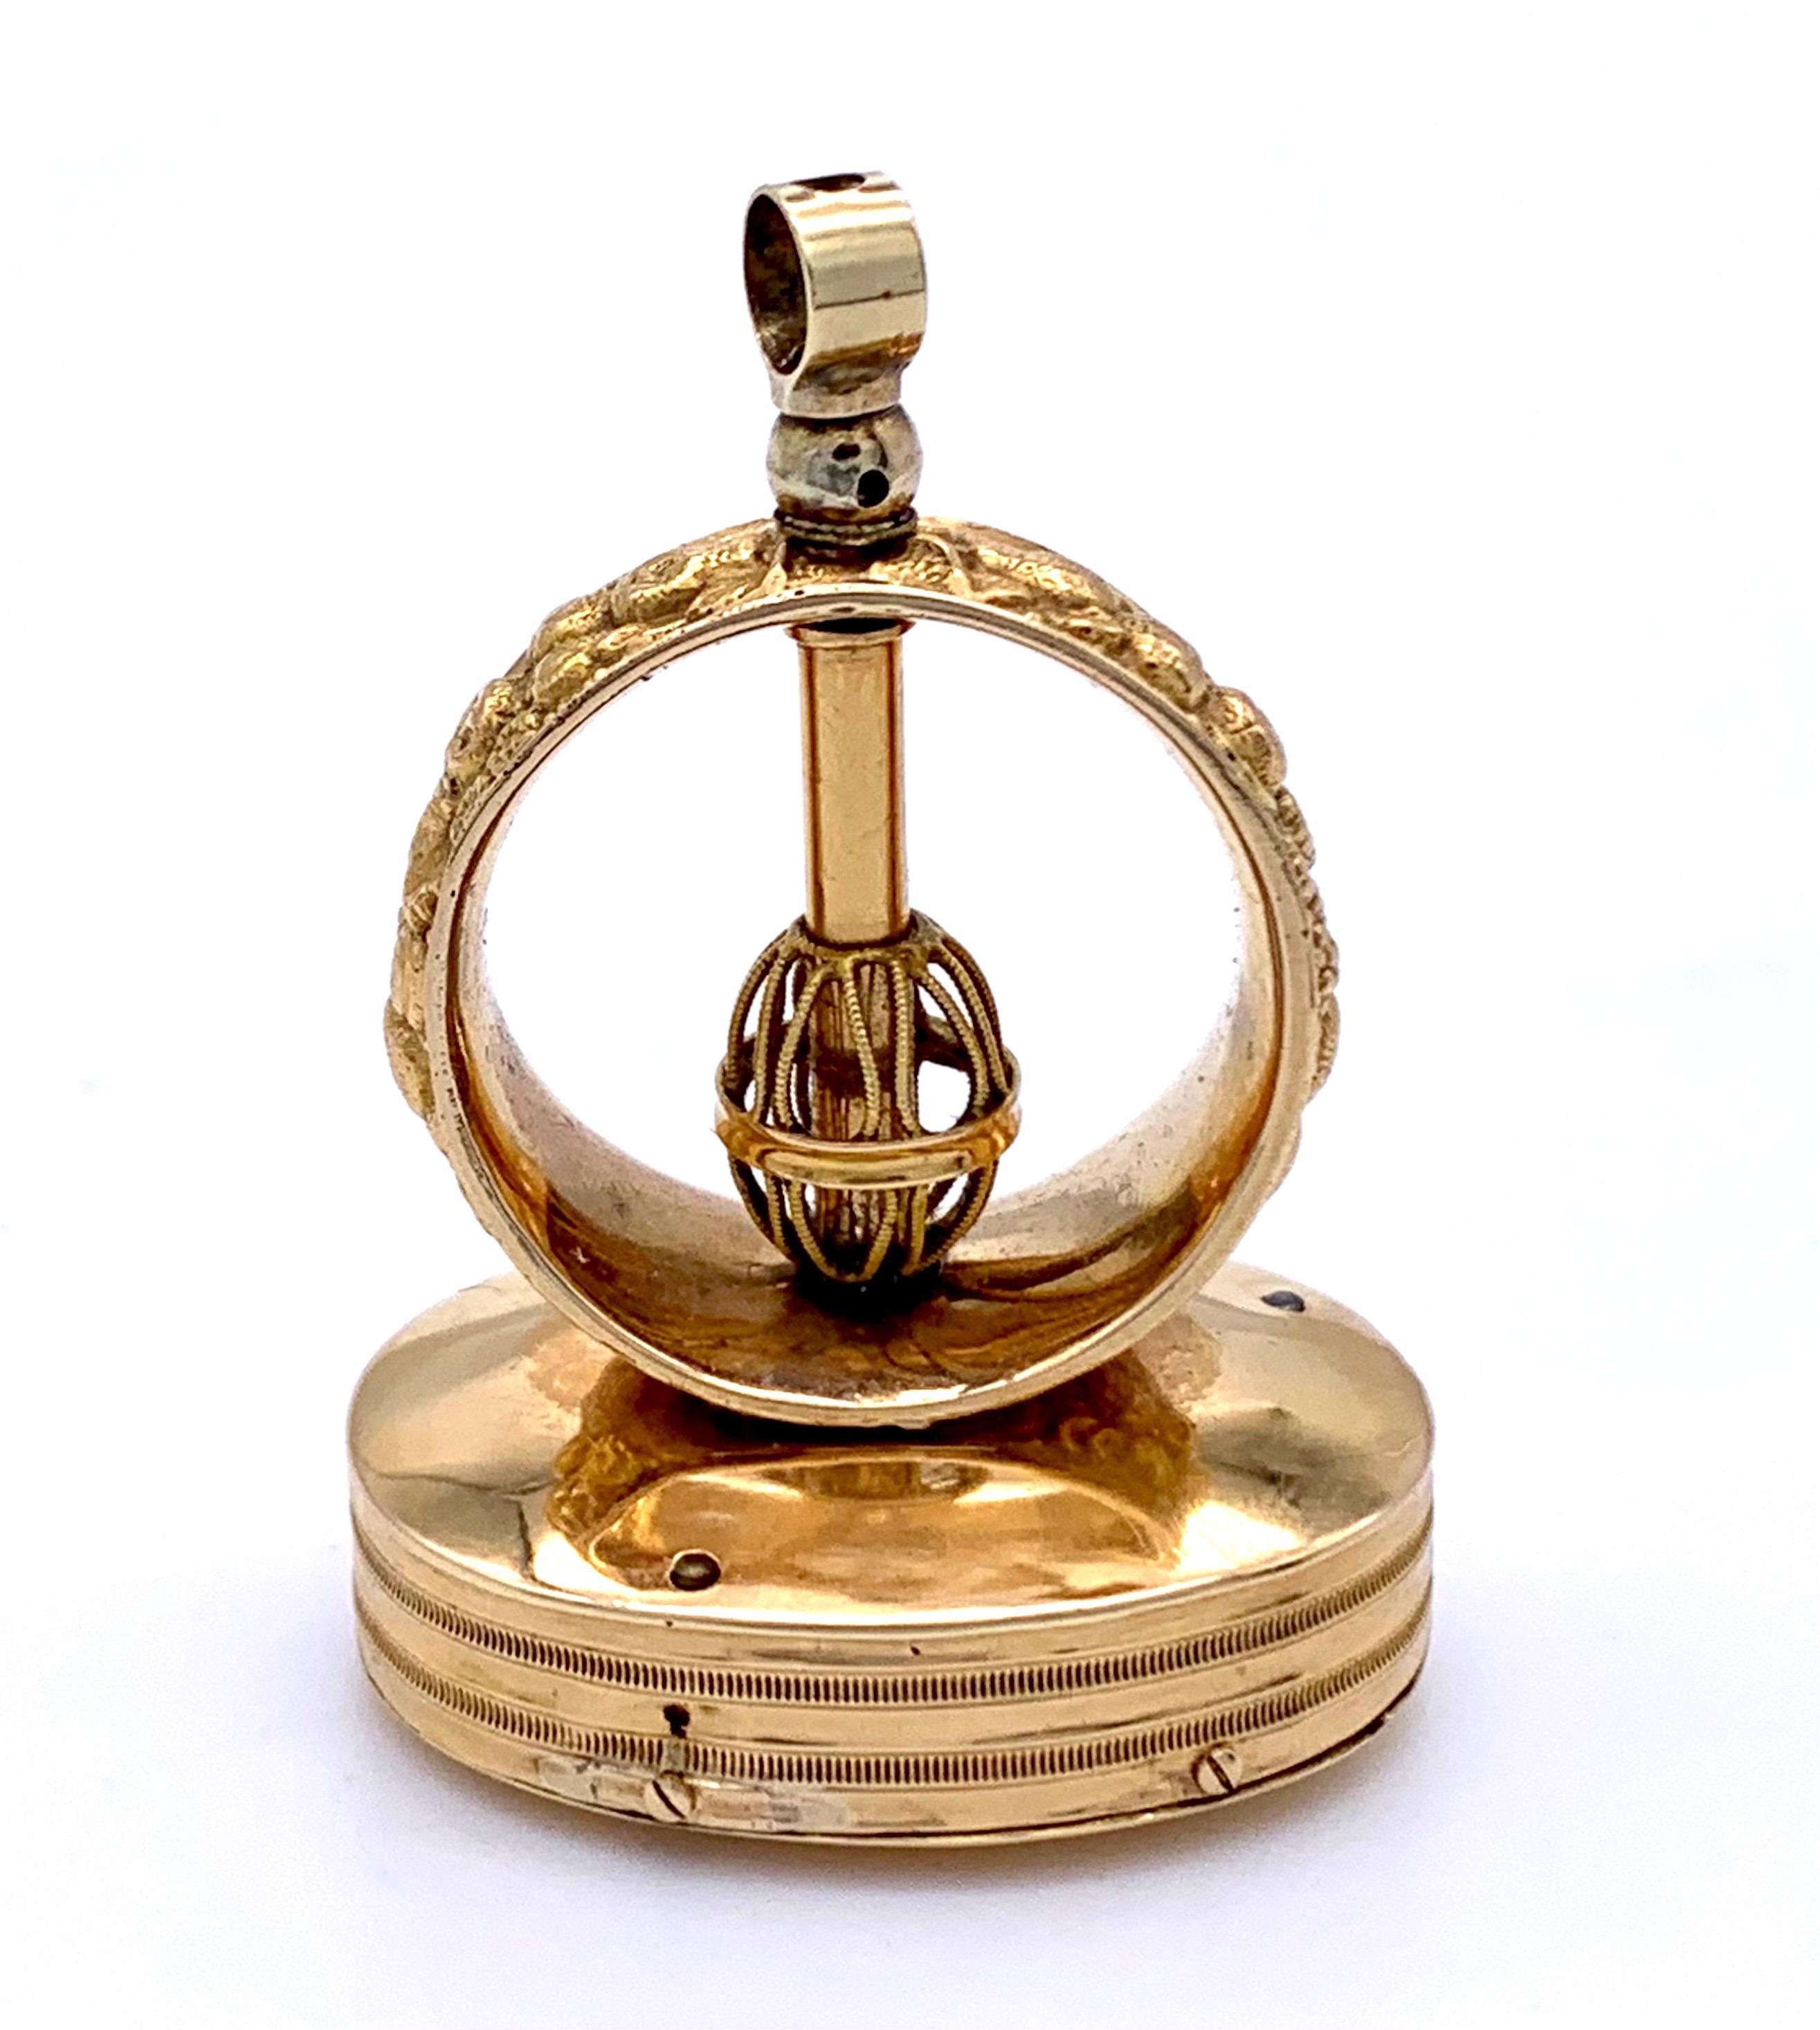 This rare novelty pendant used to grace the watchchain of a nobleman. The mechanical rarity plays a little tune and is in fine working order. The finely embossed outer shell is made out of 15 carat gold, the mecanism out of metal.